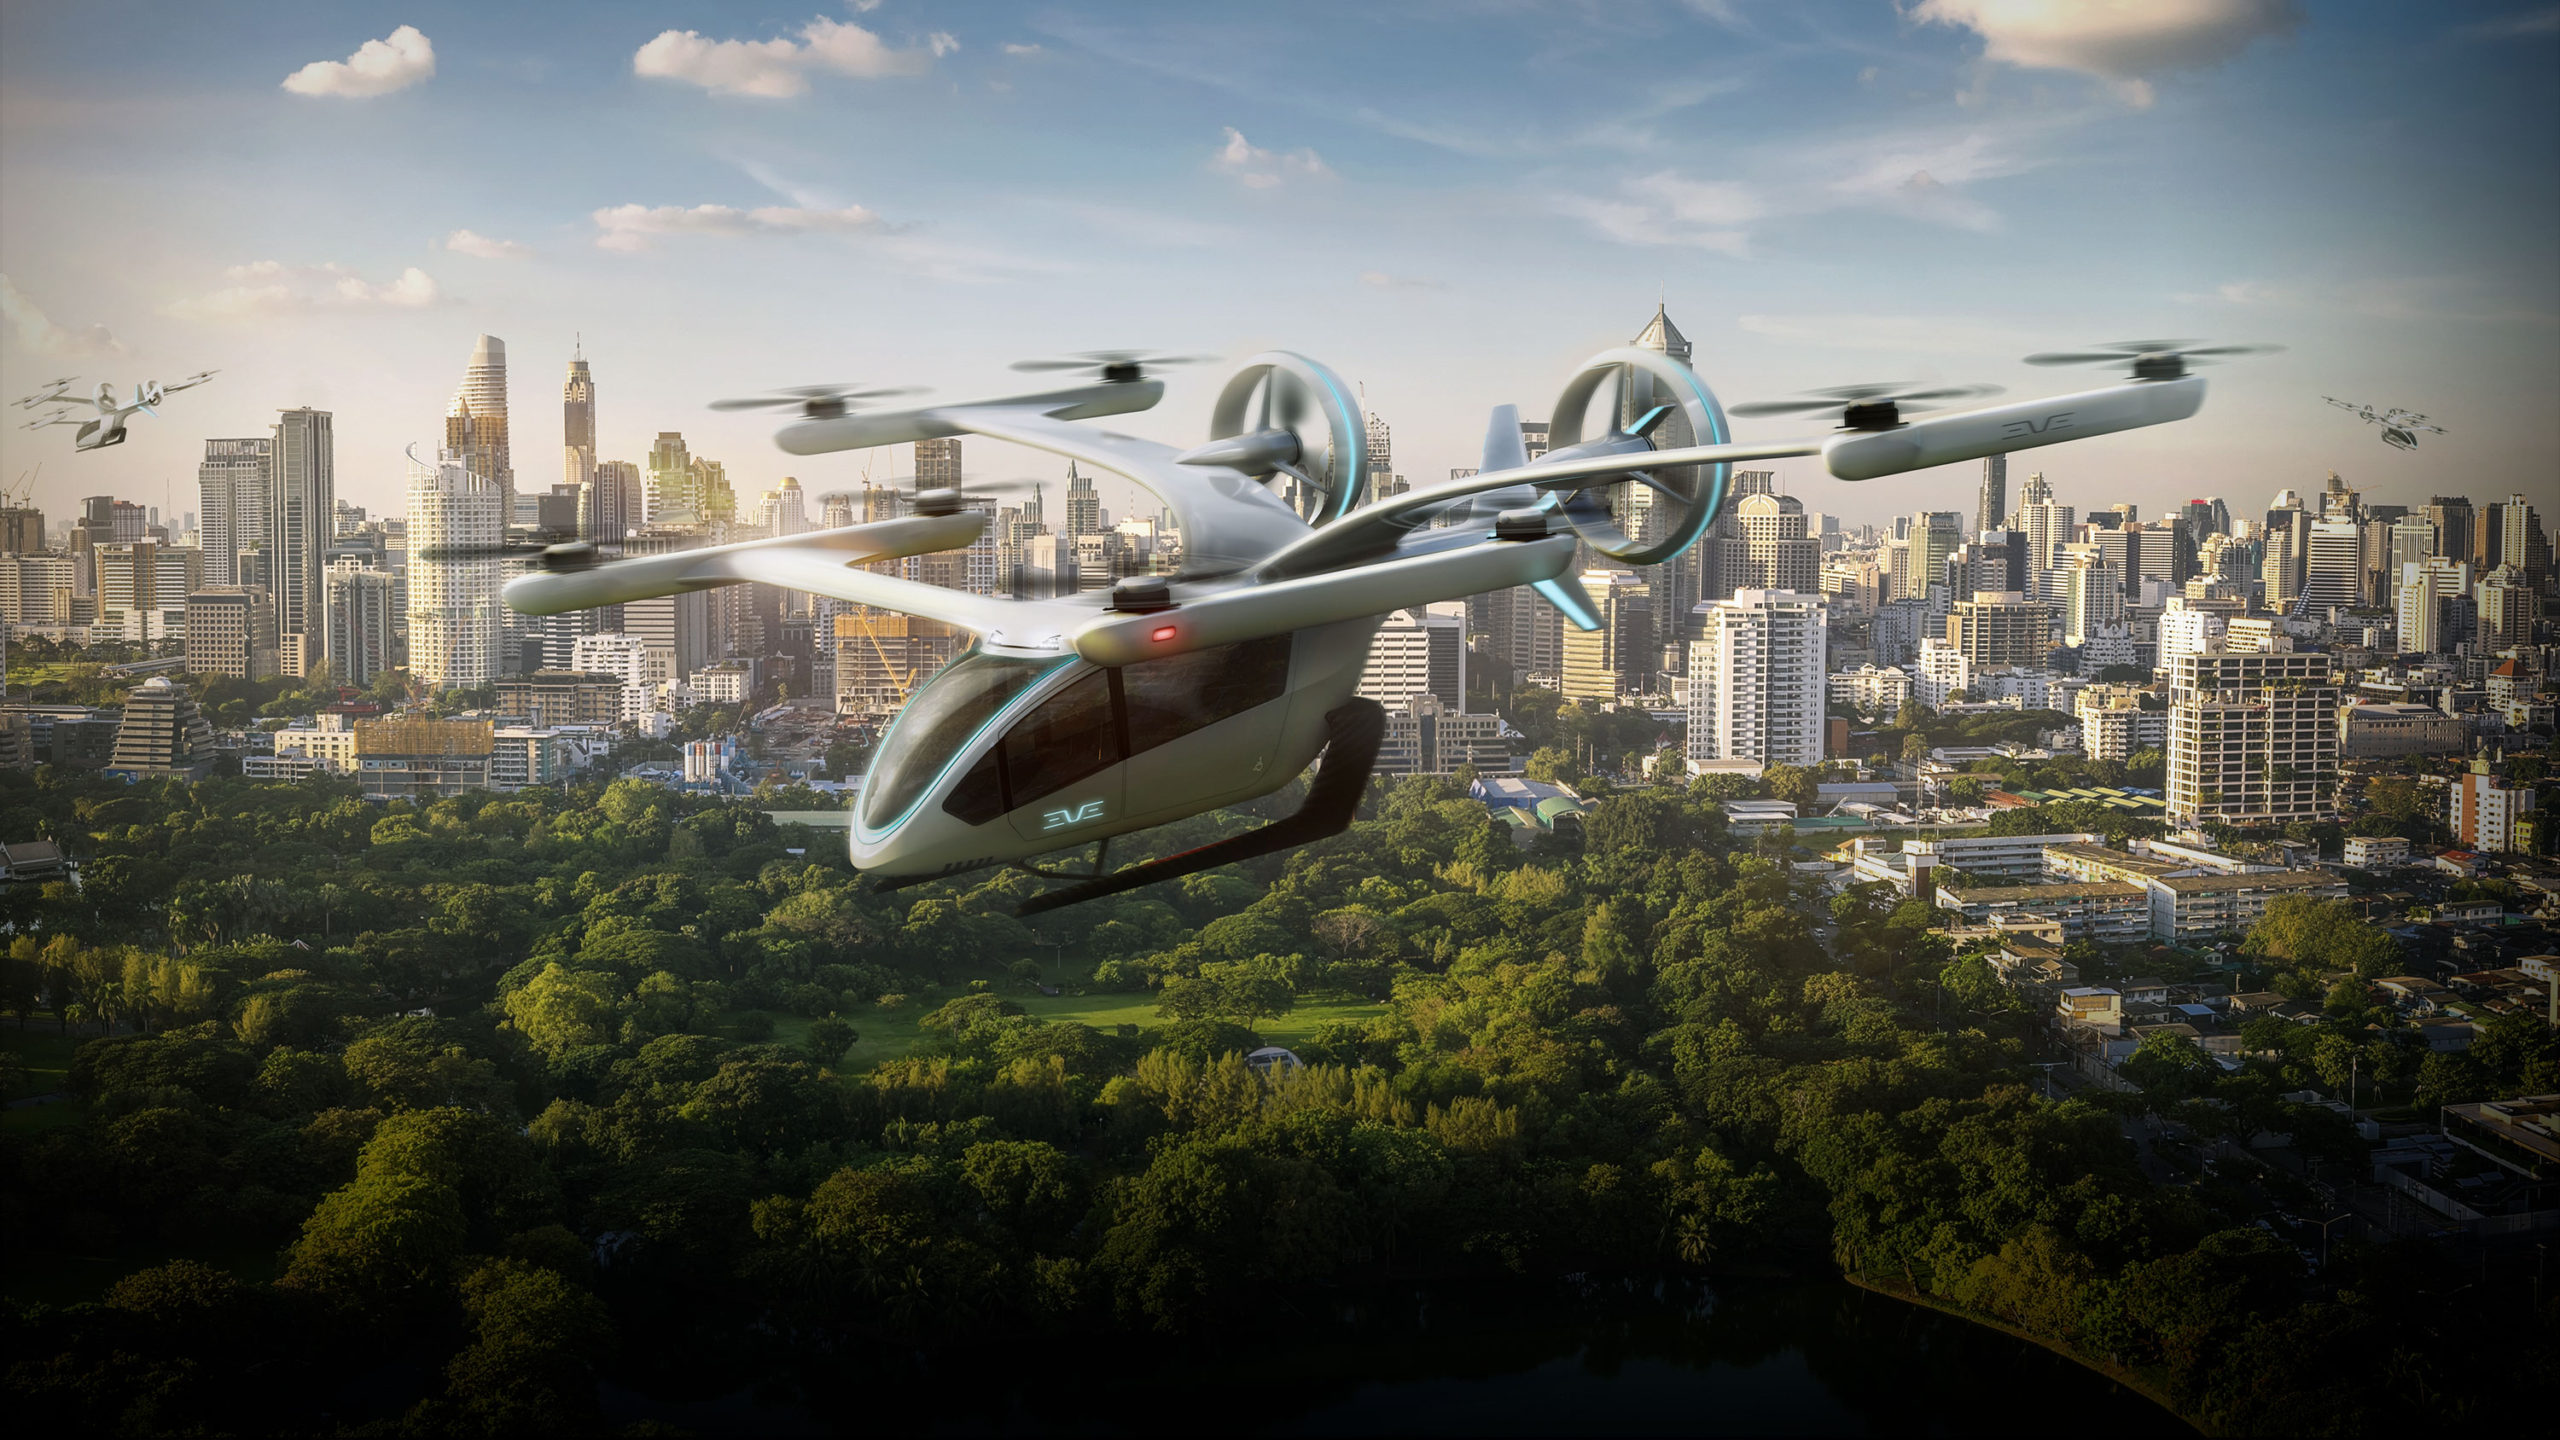 Eve, the first spin-off from EmbraerX, is launched to shape the future of Urban Air Mobility